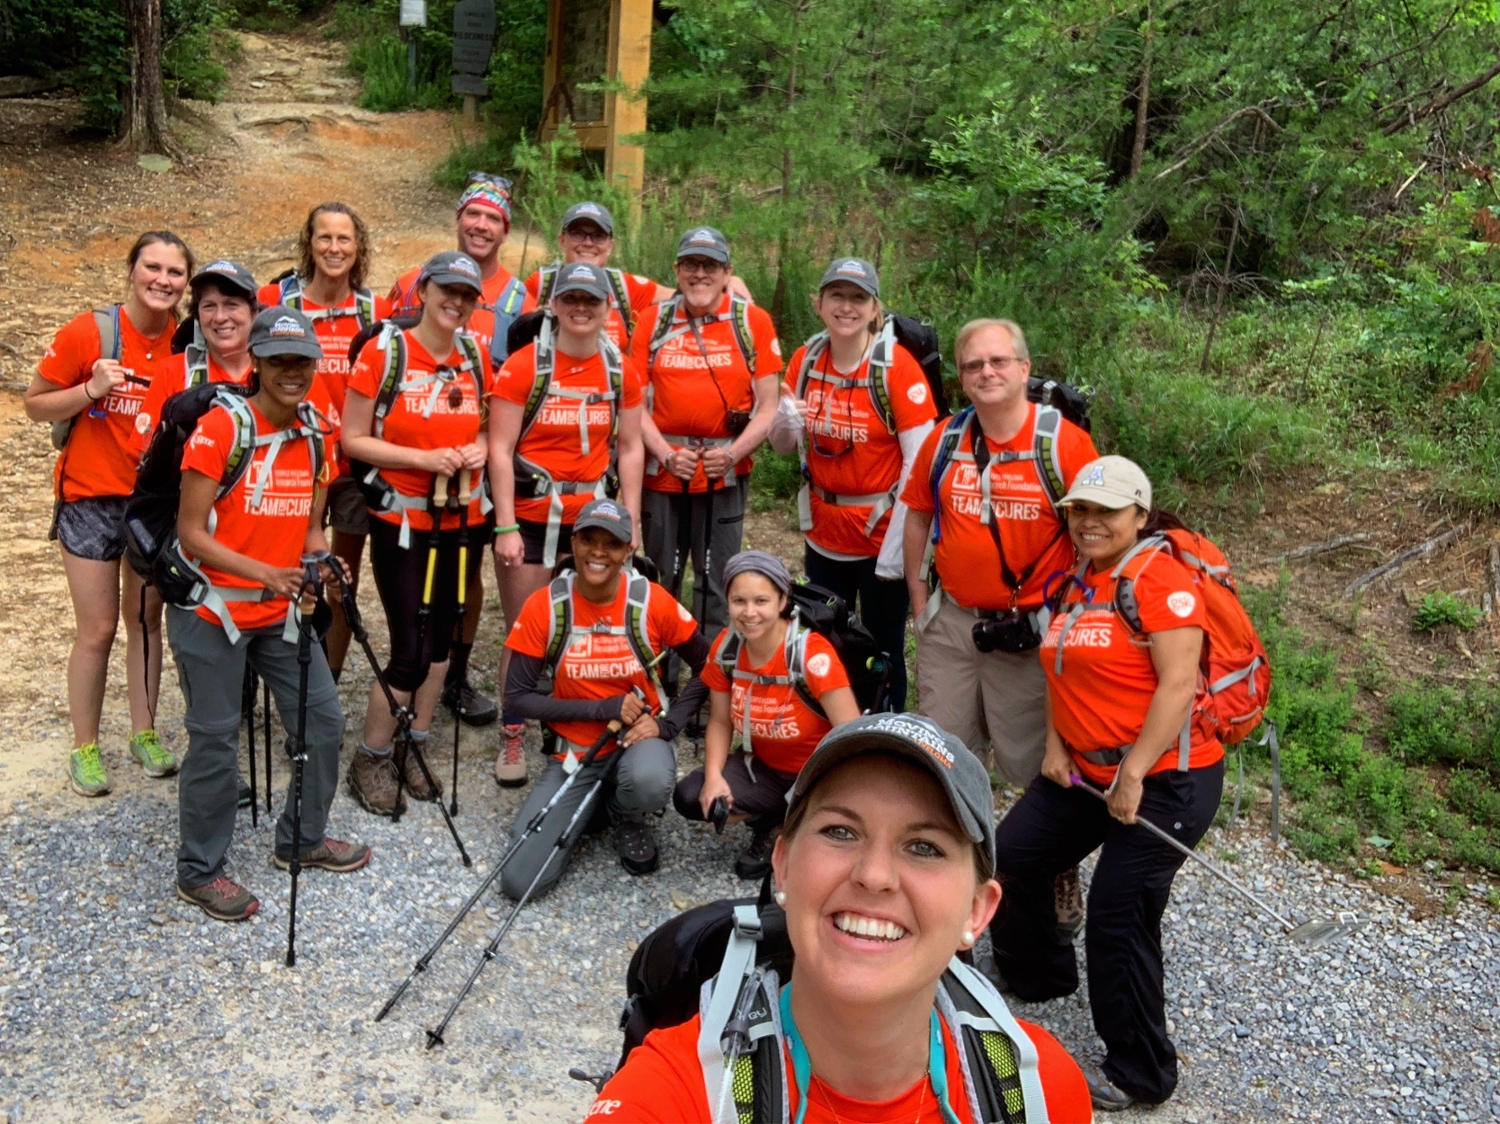 Taking a quick selfie, Meredith snaps this photos with her fellow team during her training in the mountains of North Carolina.